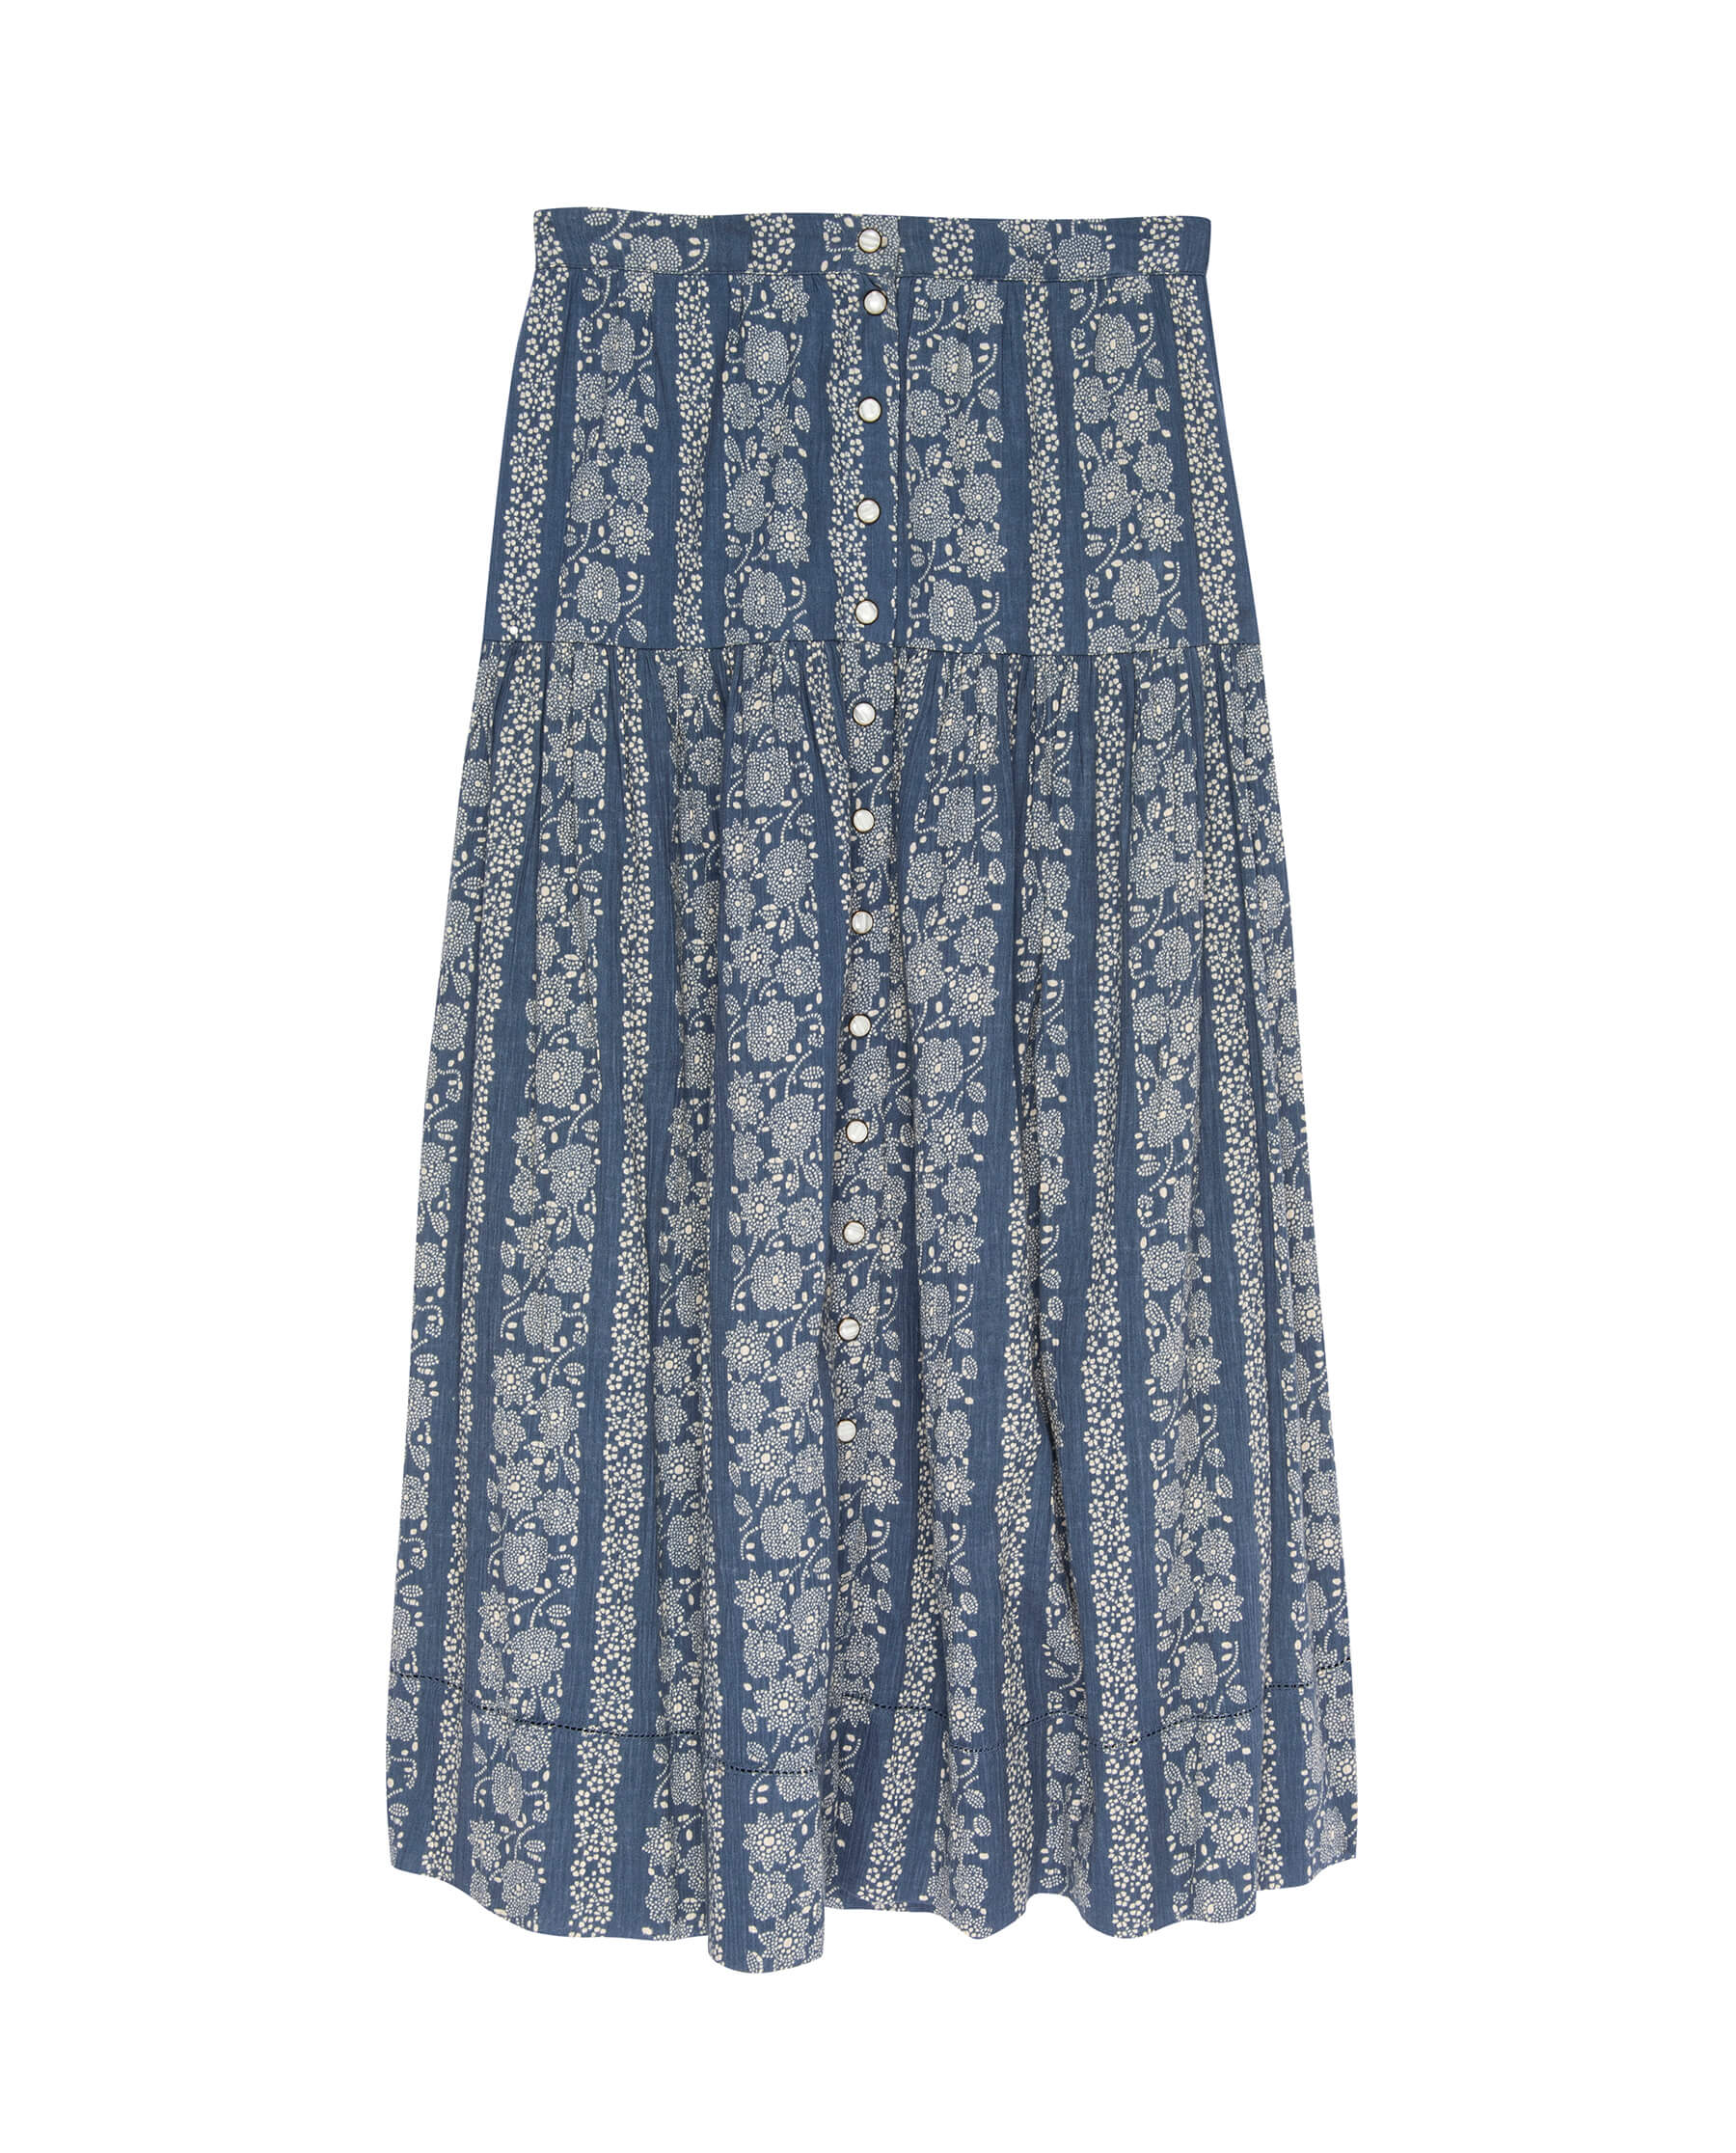 The Boating Skirt. -- Blue and Cream Token Floral